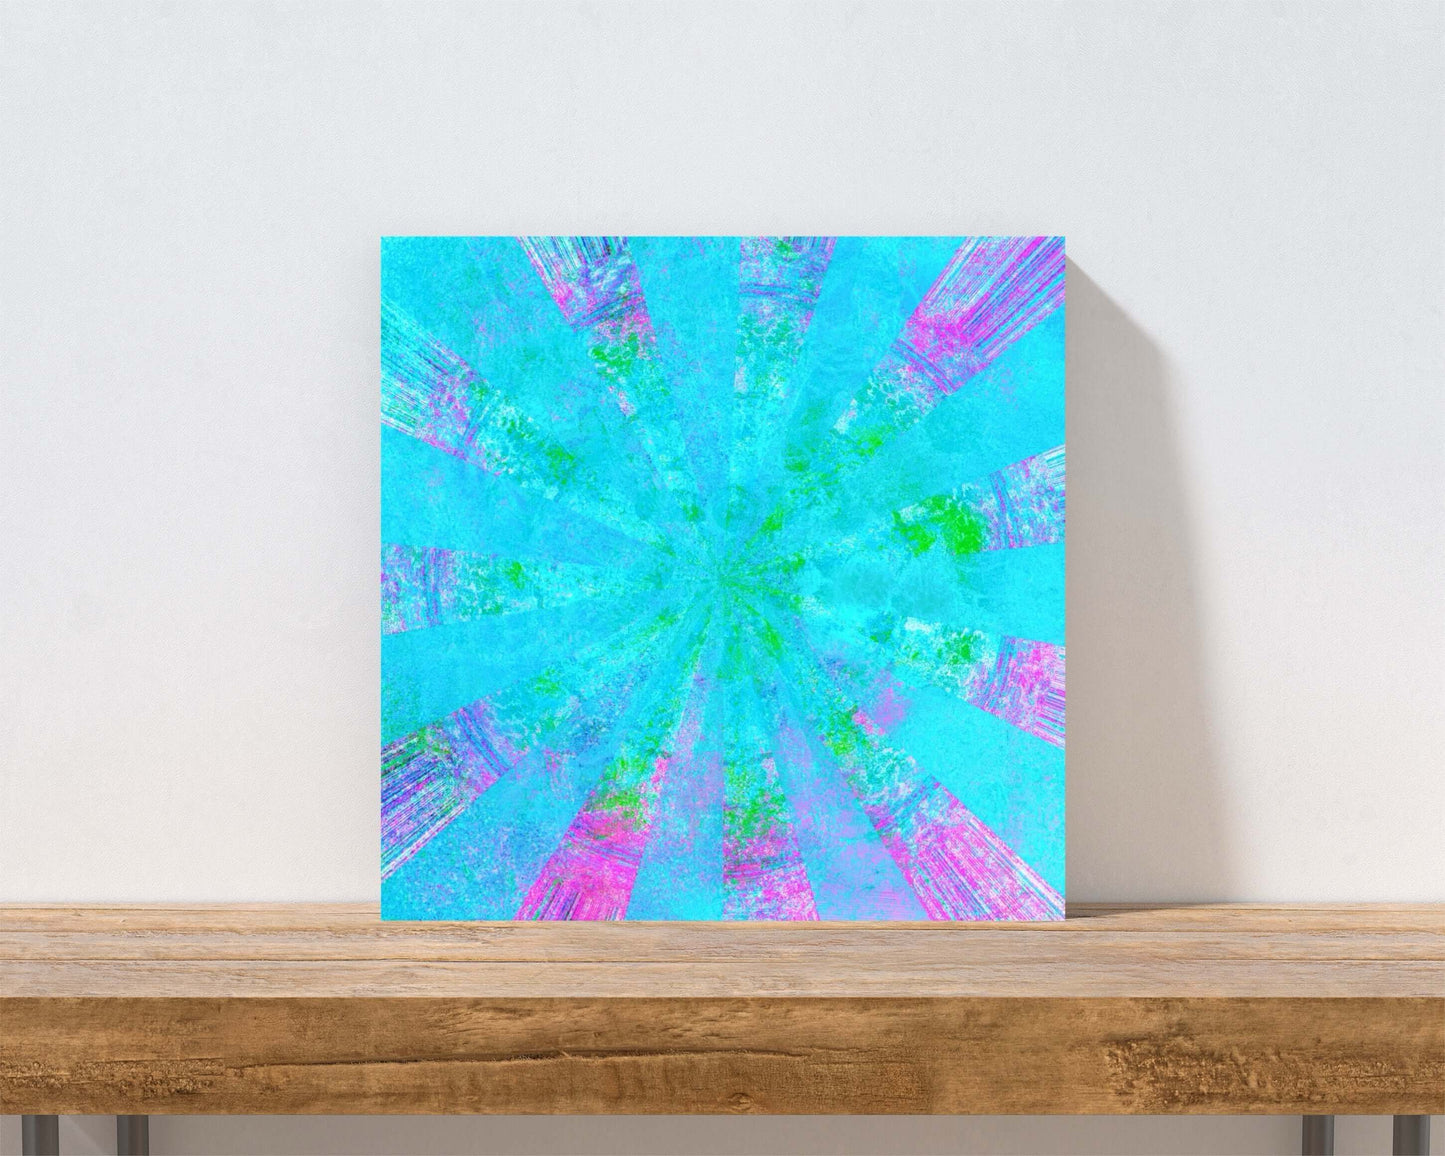 Turquoise Blue with Purple Radial “Blue Stingray” Abstract Art Canvas Print Wall Art Small Canvas on Shelf